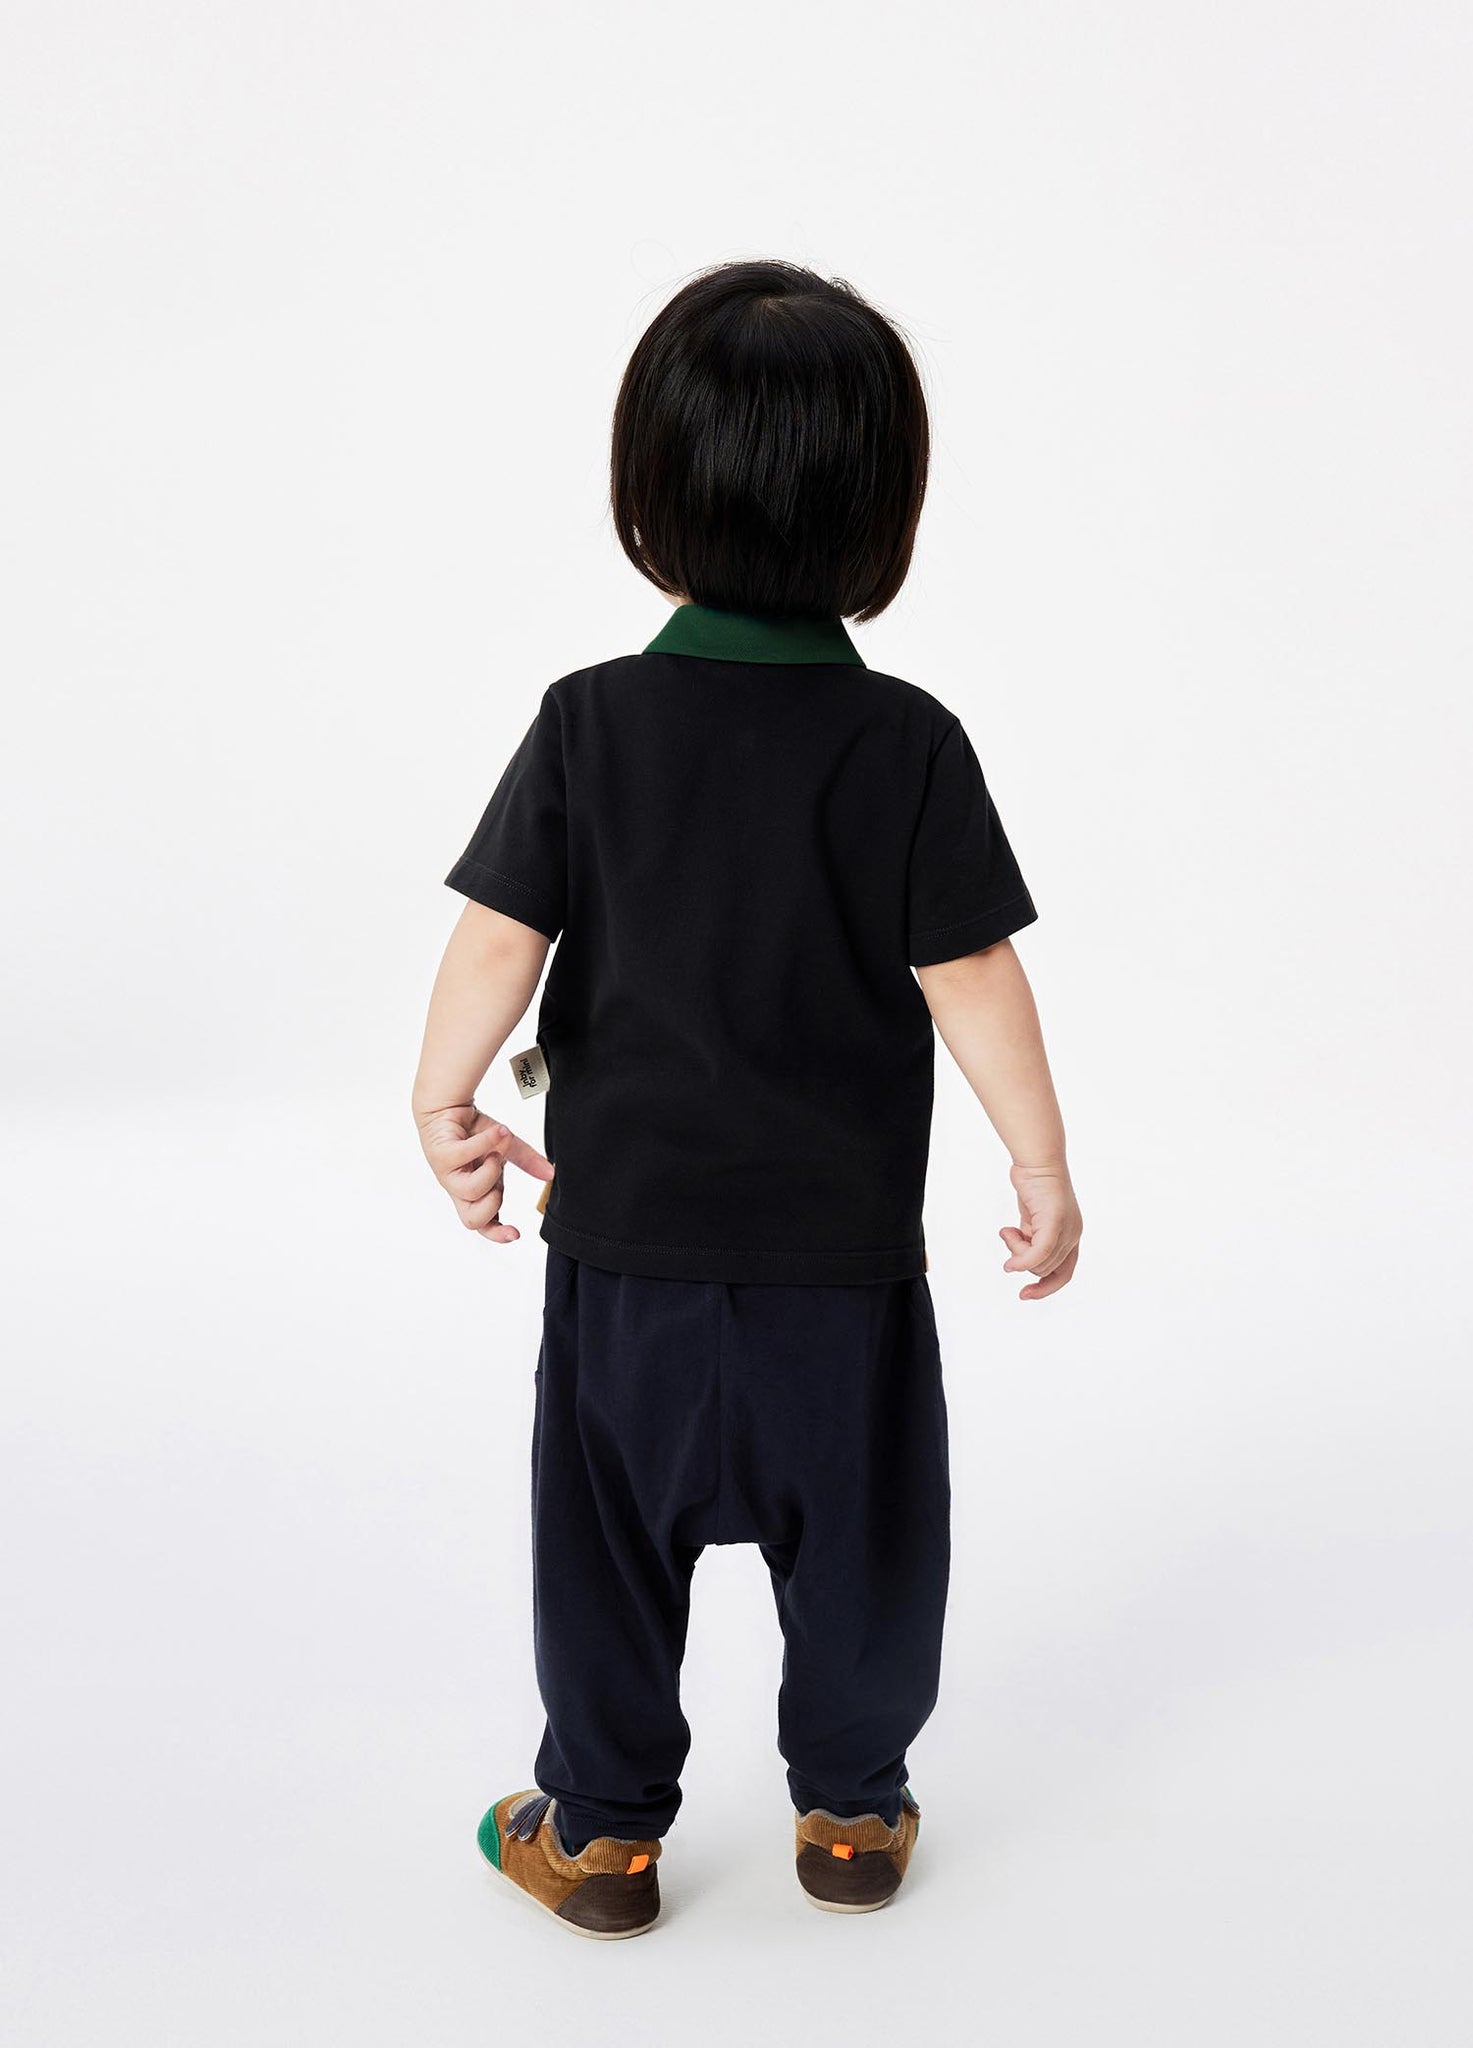 T-Shirt / jnby for mini Solid Short Sleeve Polo Shirt